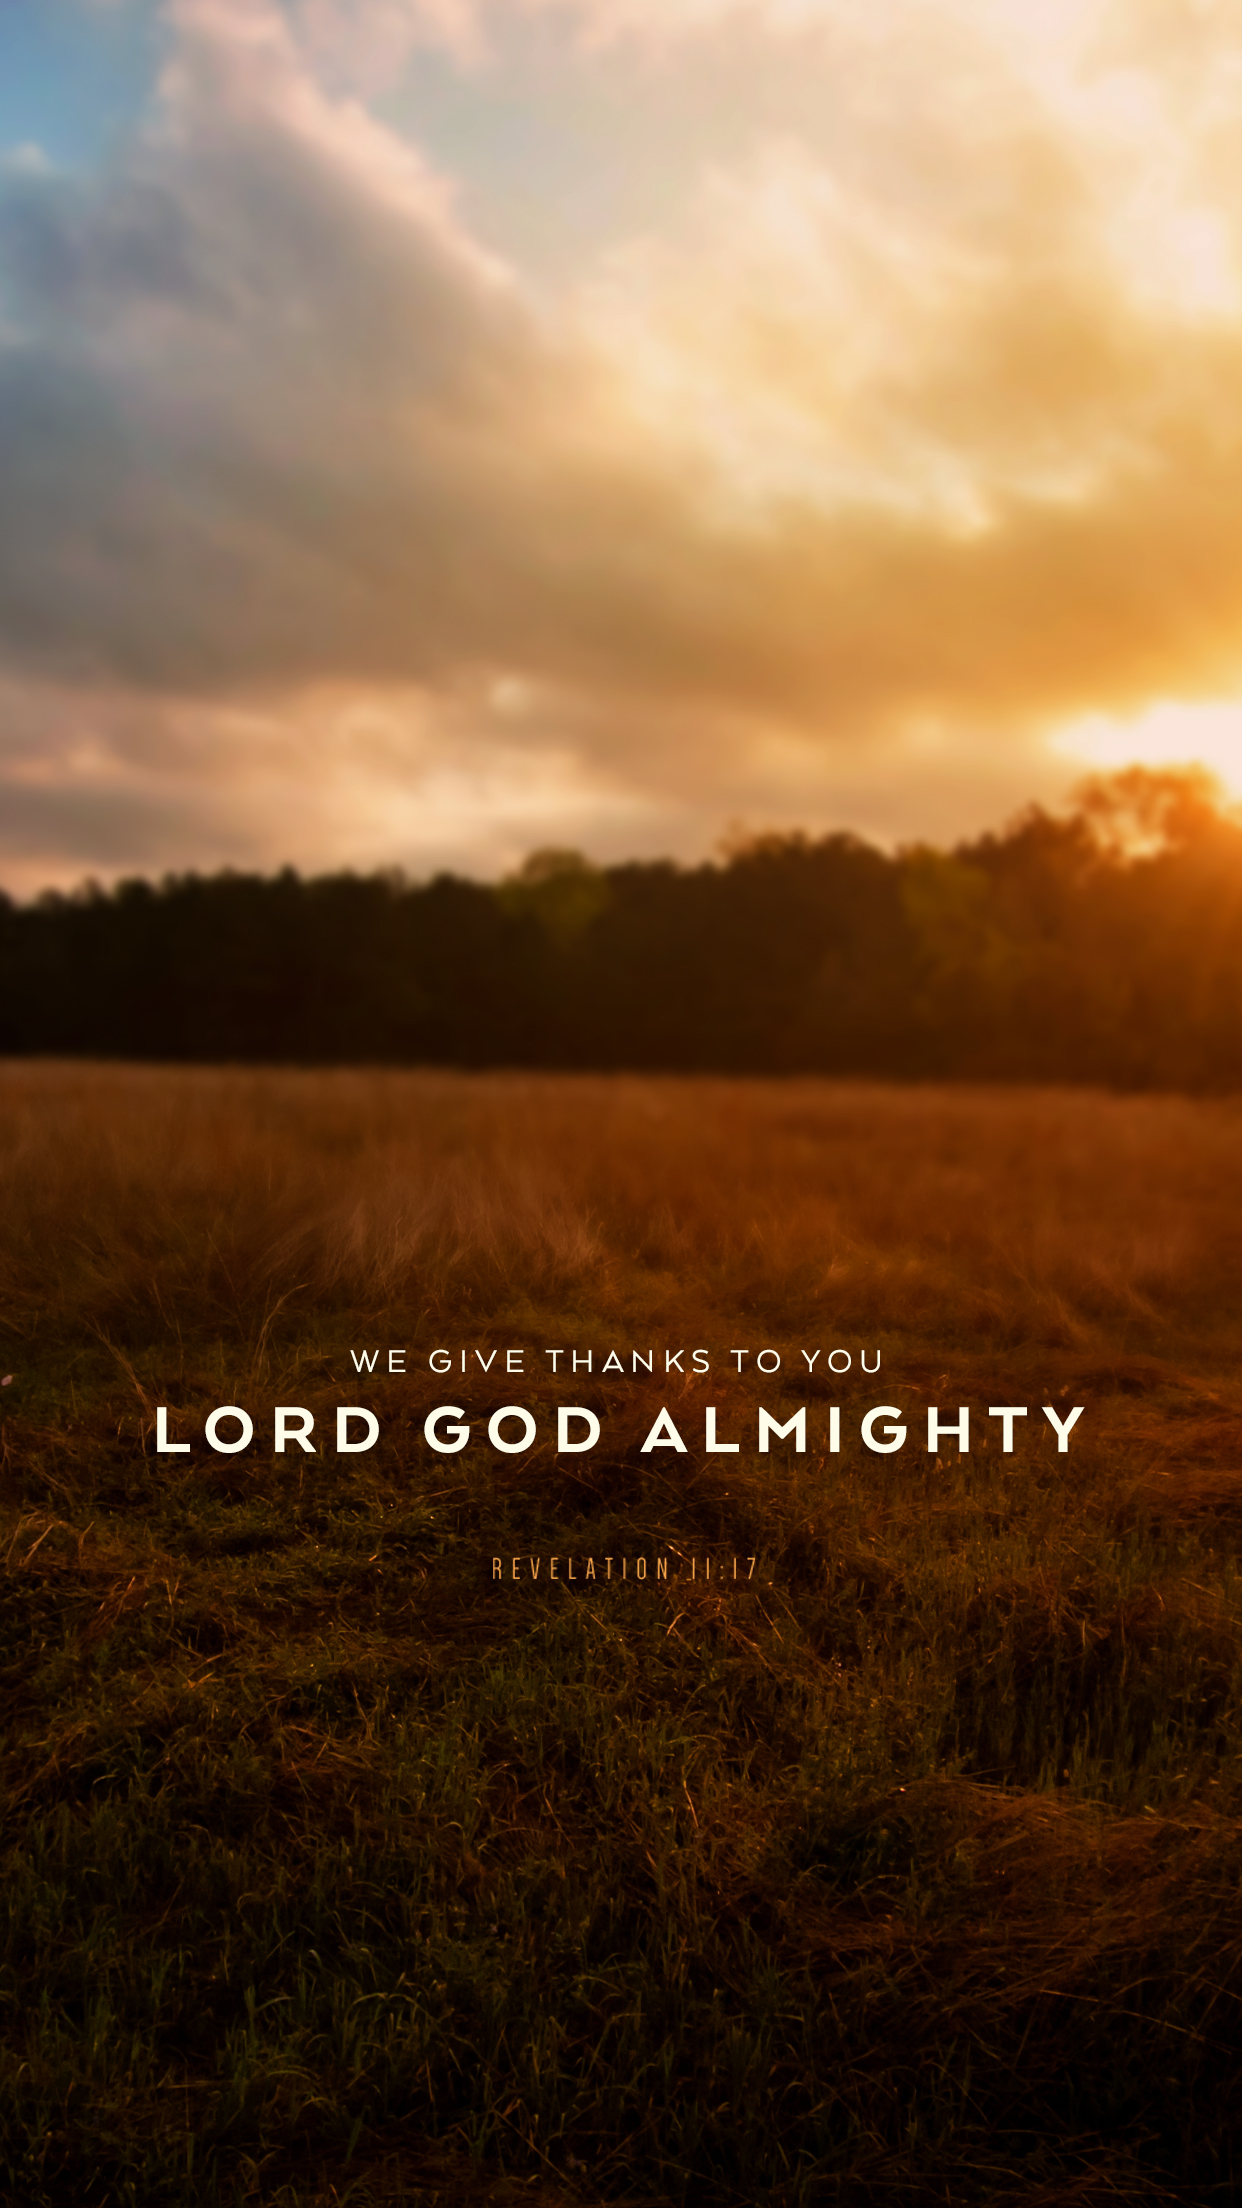 Wednesday Wallpaper: We Give Thanks to You, Lord God Almighty